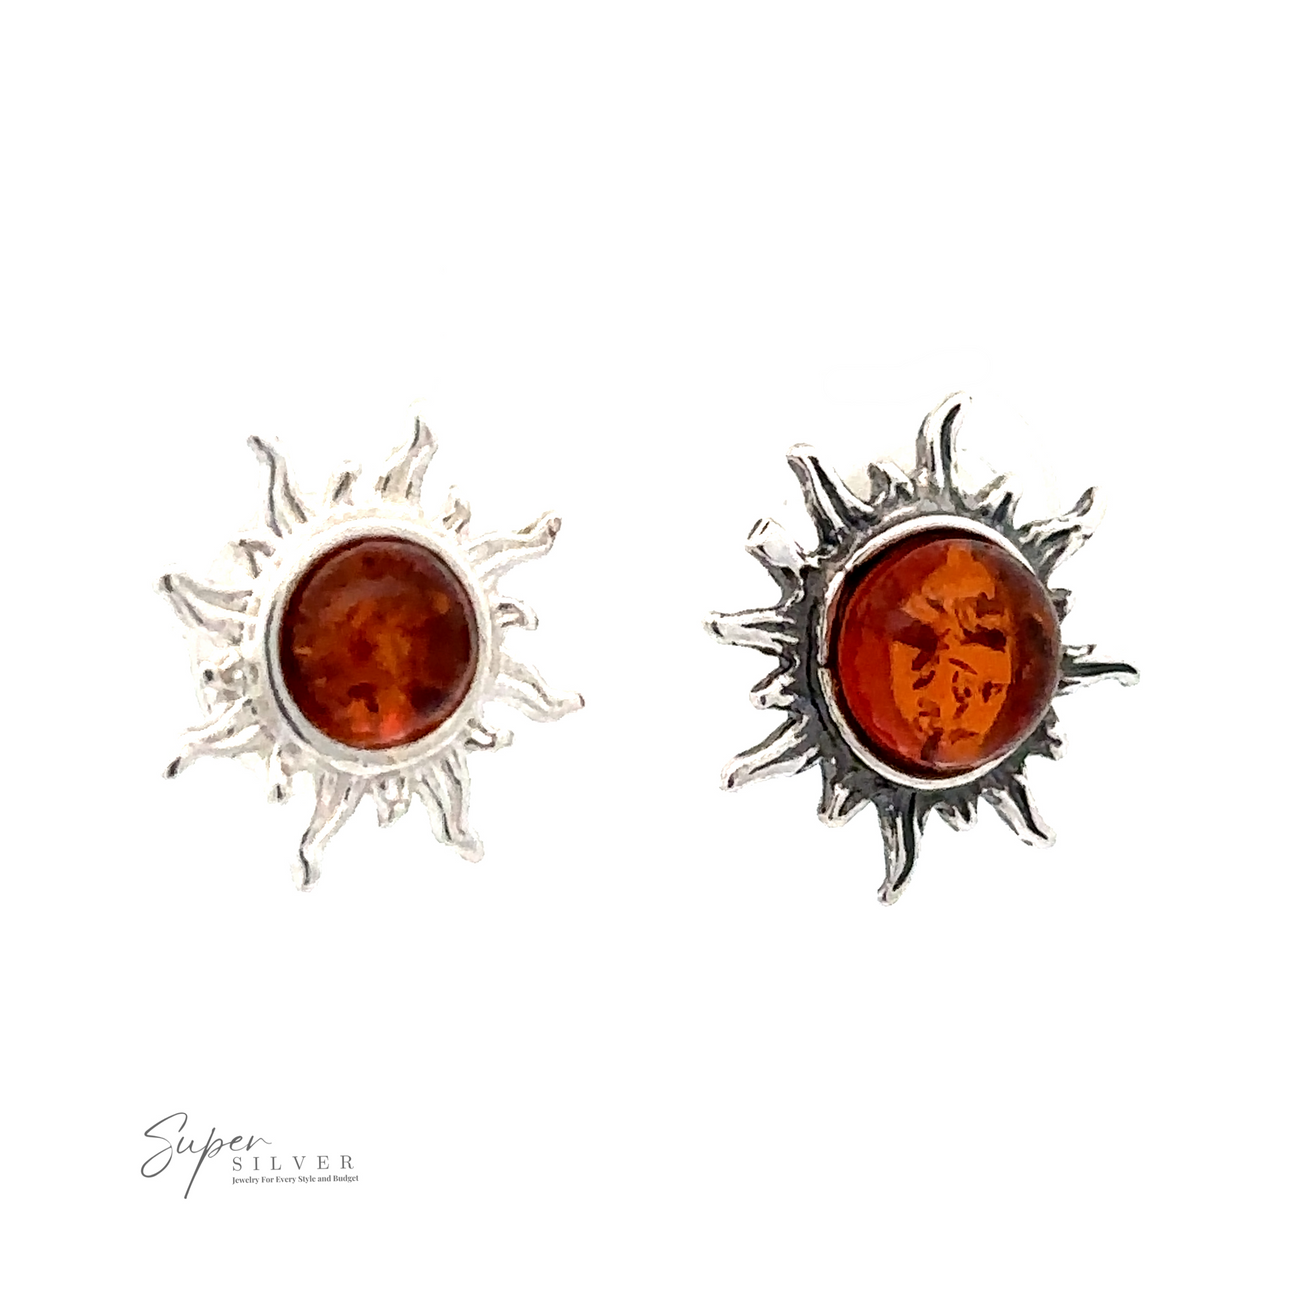 
                  
                    A pair of Brilliant Amber Sun Stud Earrings with Baltic amber center stones, displayed against a white background. The logo "Super Silver" appears in the bottom left corner.
                  
                